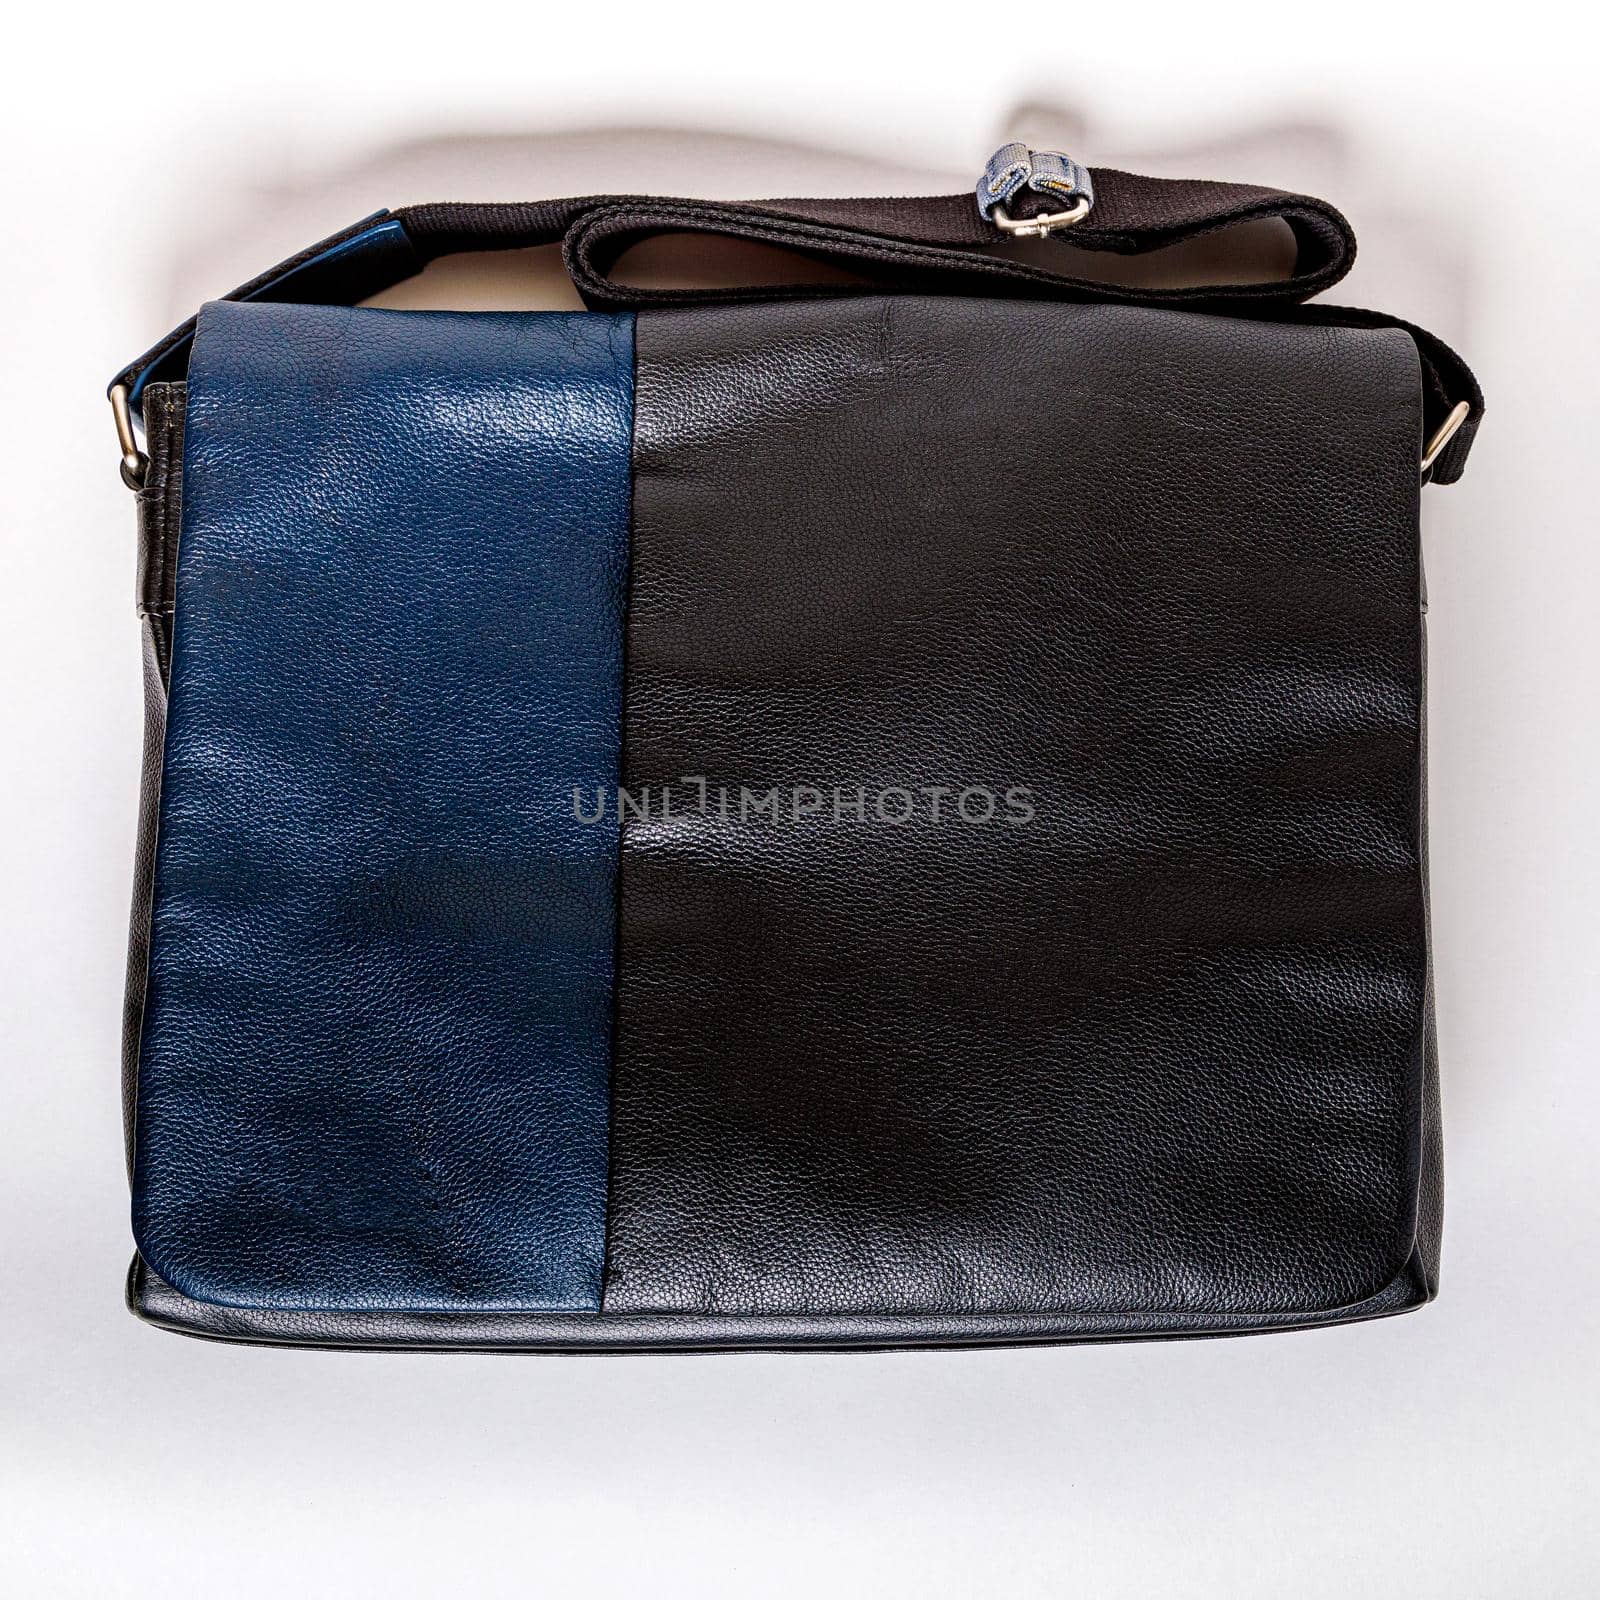 Men's leather bag in black and blue with a shoulder strap. Leather bag for a businessman. Close-up, top view.